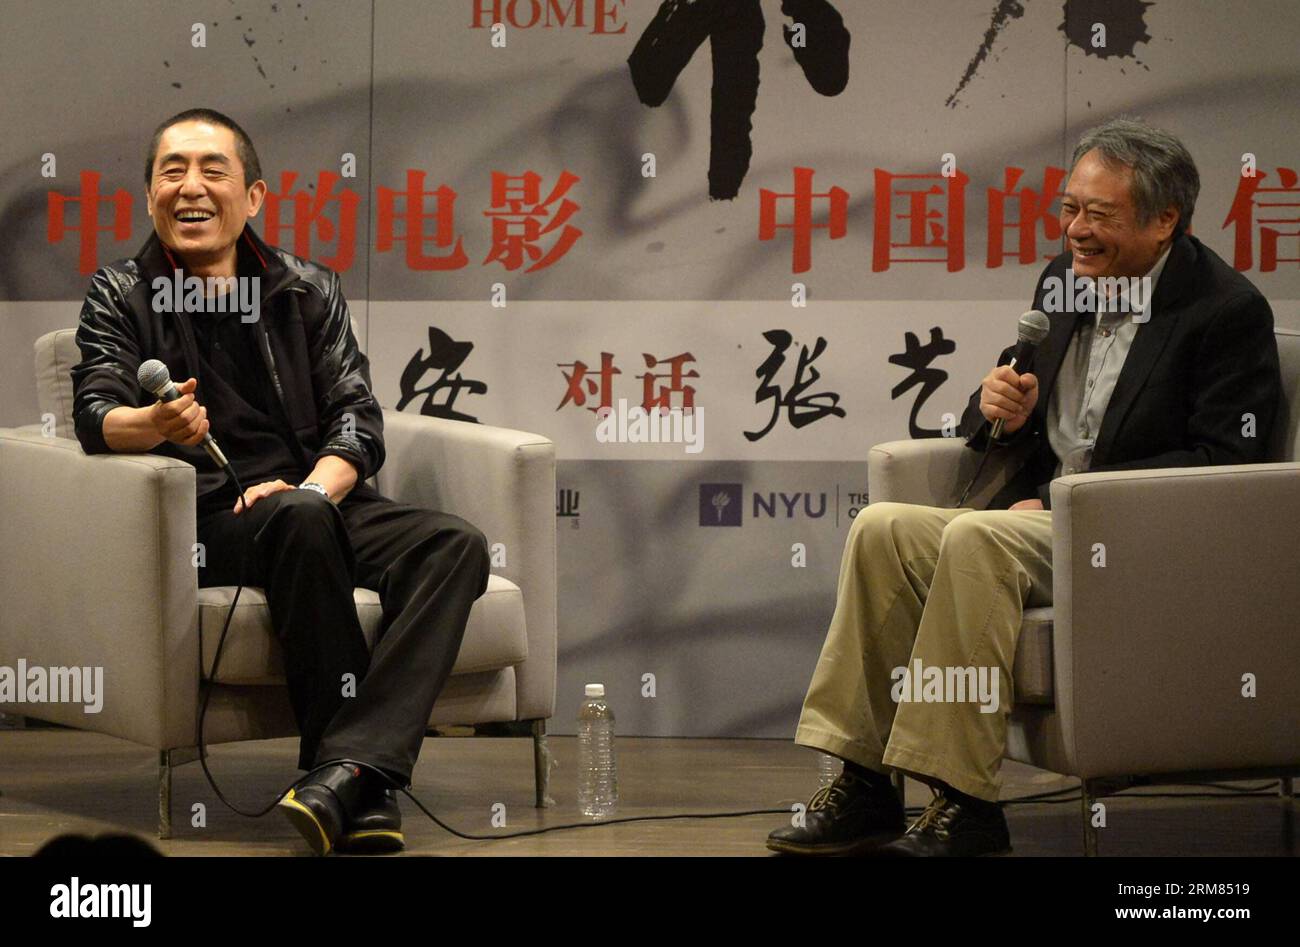 NEW YORK, March 27, 2014 (Xinhua) -- Two-time Oscar-winning director Ang Lee (R) and renowned film director Zhang Yimou attend a dialog in New York, the United States, March 27, 2014. The two film directors on Thursday held a dialog about Chinese film culture and Zhang s new movie Coming Home . (Xinhua/Wang Lei) (lyx) U.S.-NEW YORK-FILM DIRECTORS-ZHANG YIMOU-ANG LEE-DIALOGUE PUBLICATIONxNOTxINxCHN   New York March 27 2014 XINHUA Two Time Oscar Winning Director Ang Lee r and renowned Film Director Zhang Yimou attend a Dialogue in New York The United States March 27 2014 The Two Film Directors O Stock Photo